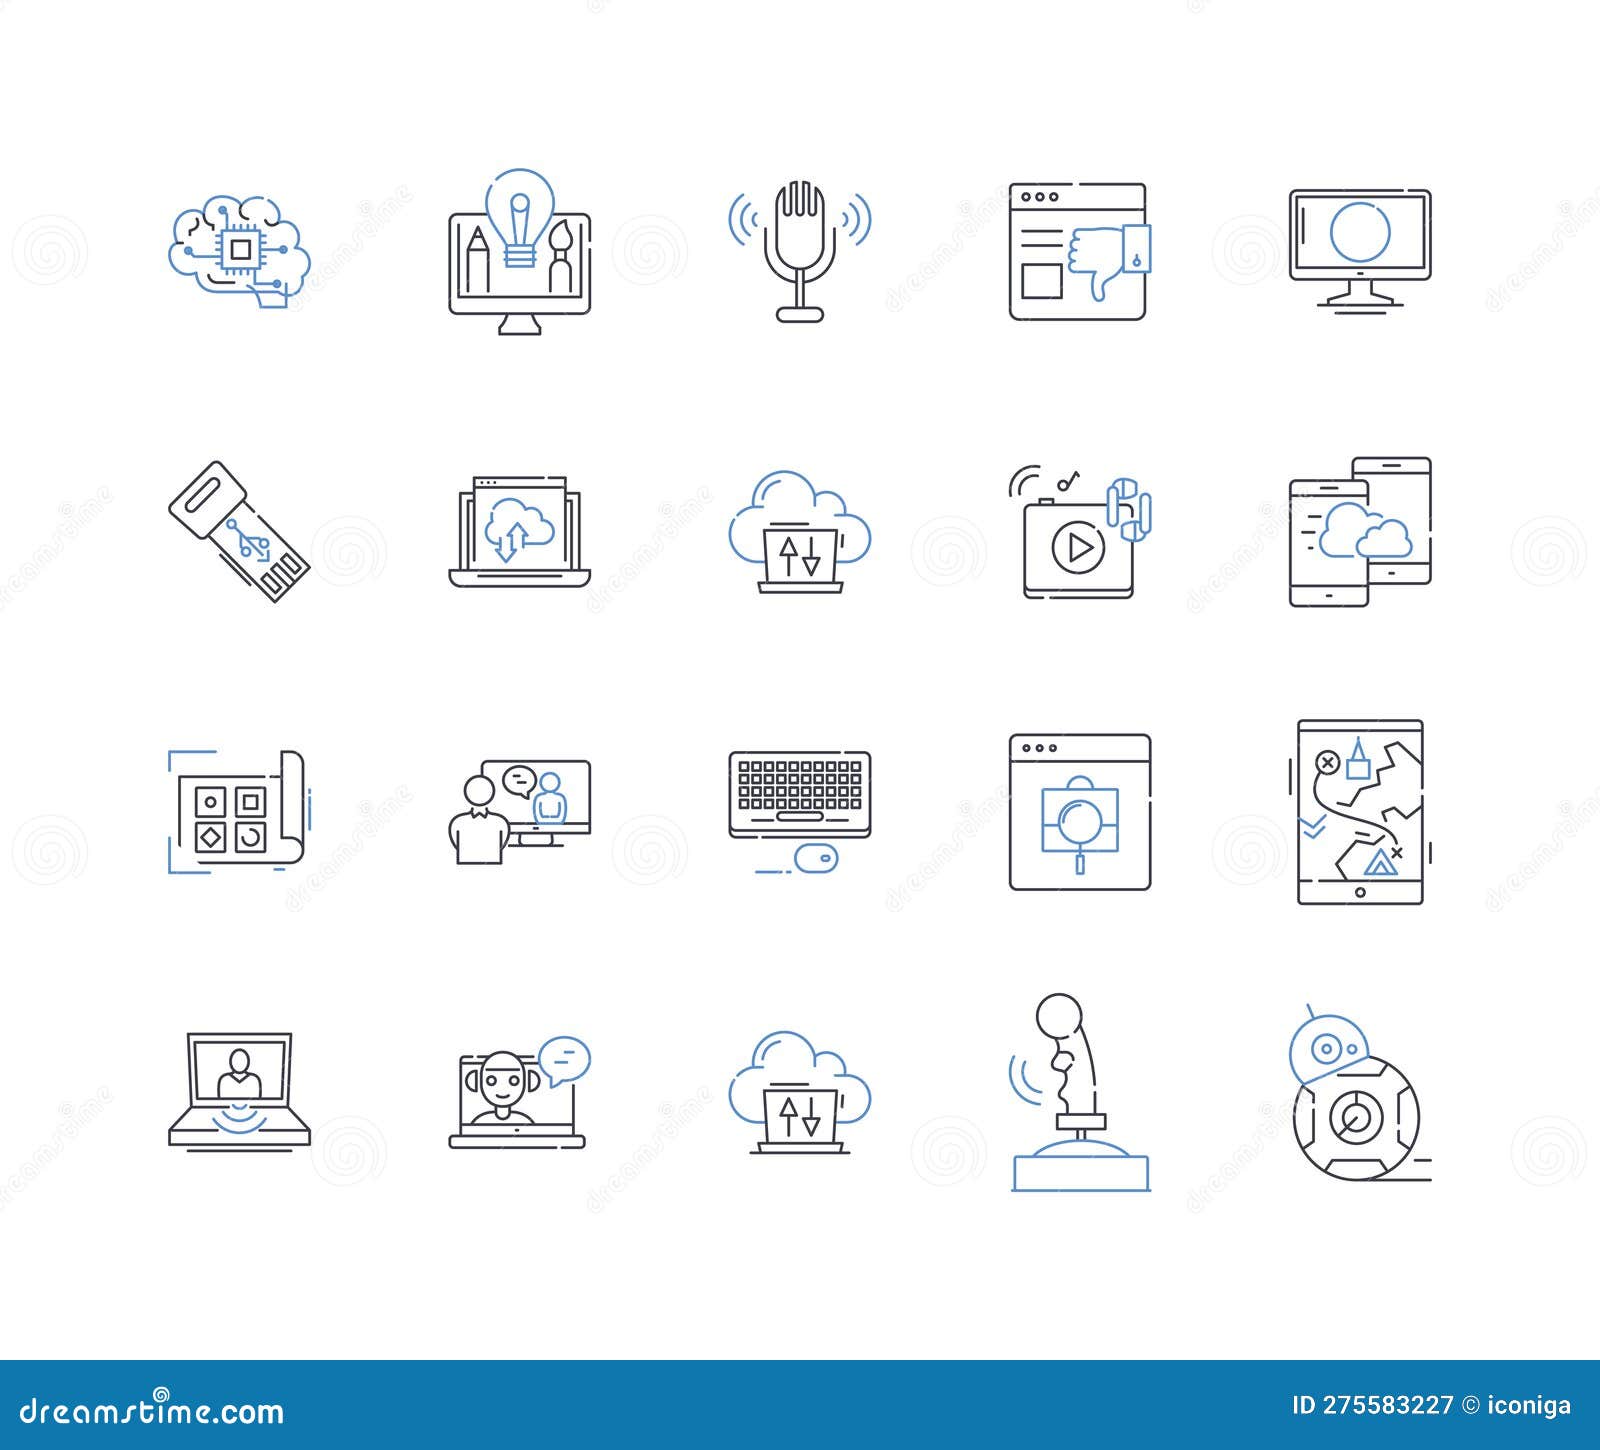 text analytics line icons collection. nlp, sentiment, semantics, syntax, topic, clustering, classification  and